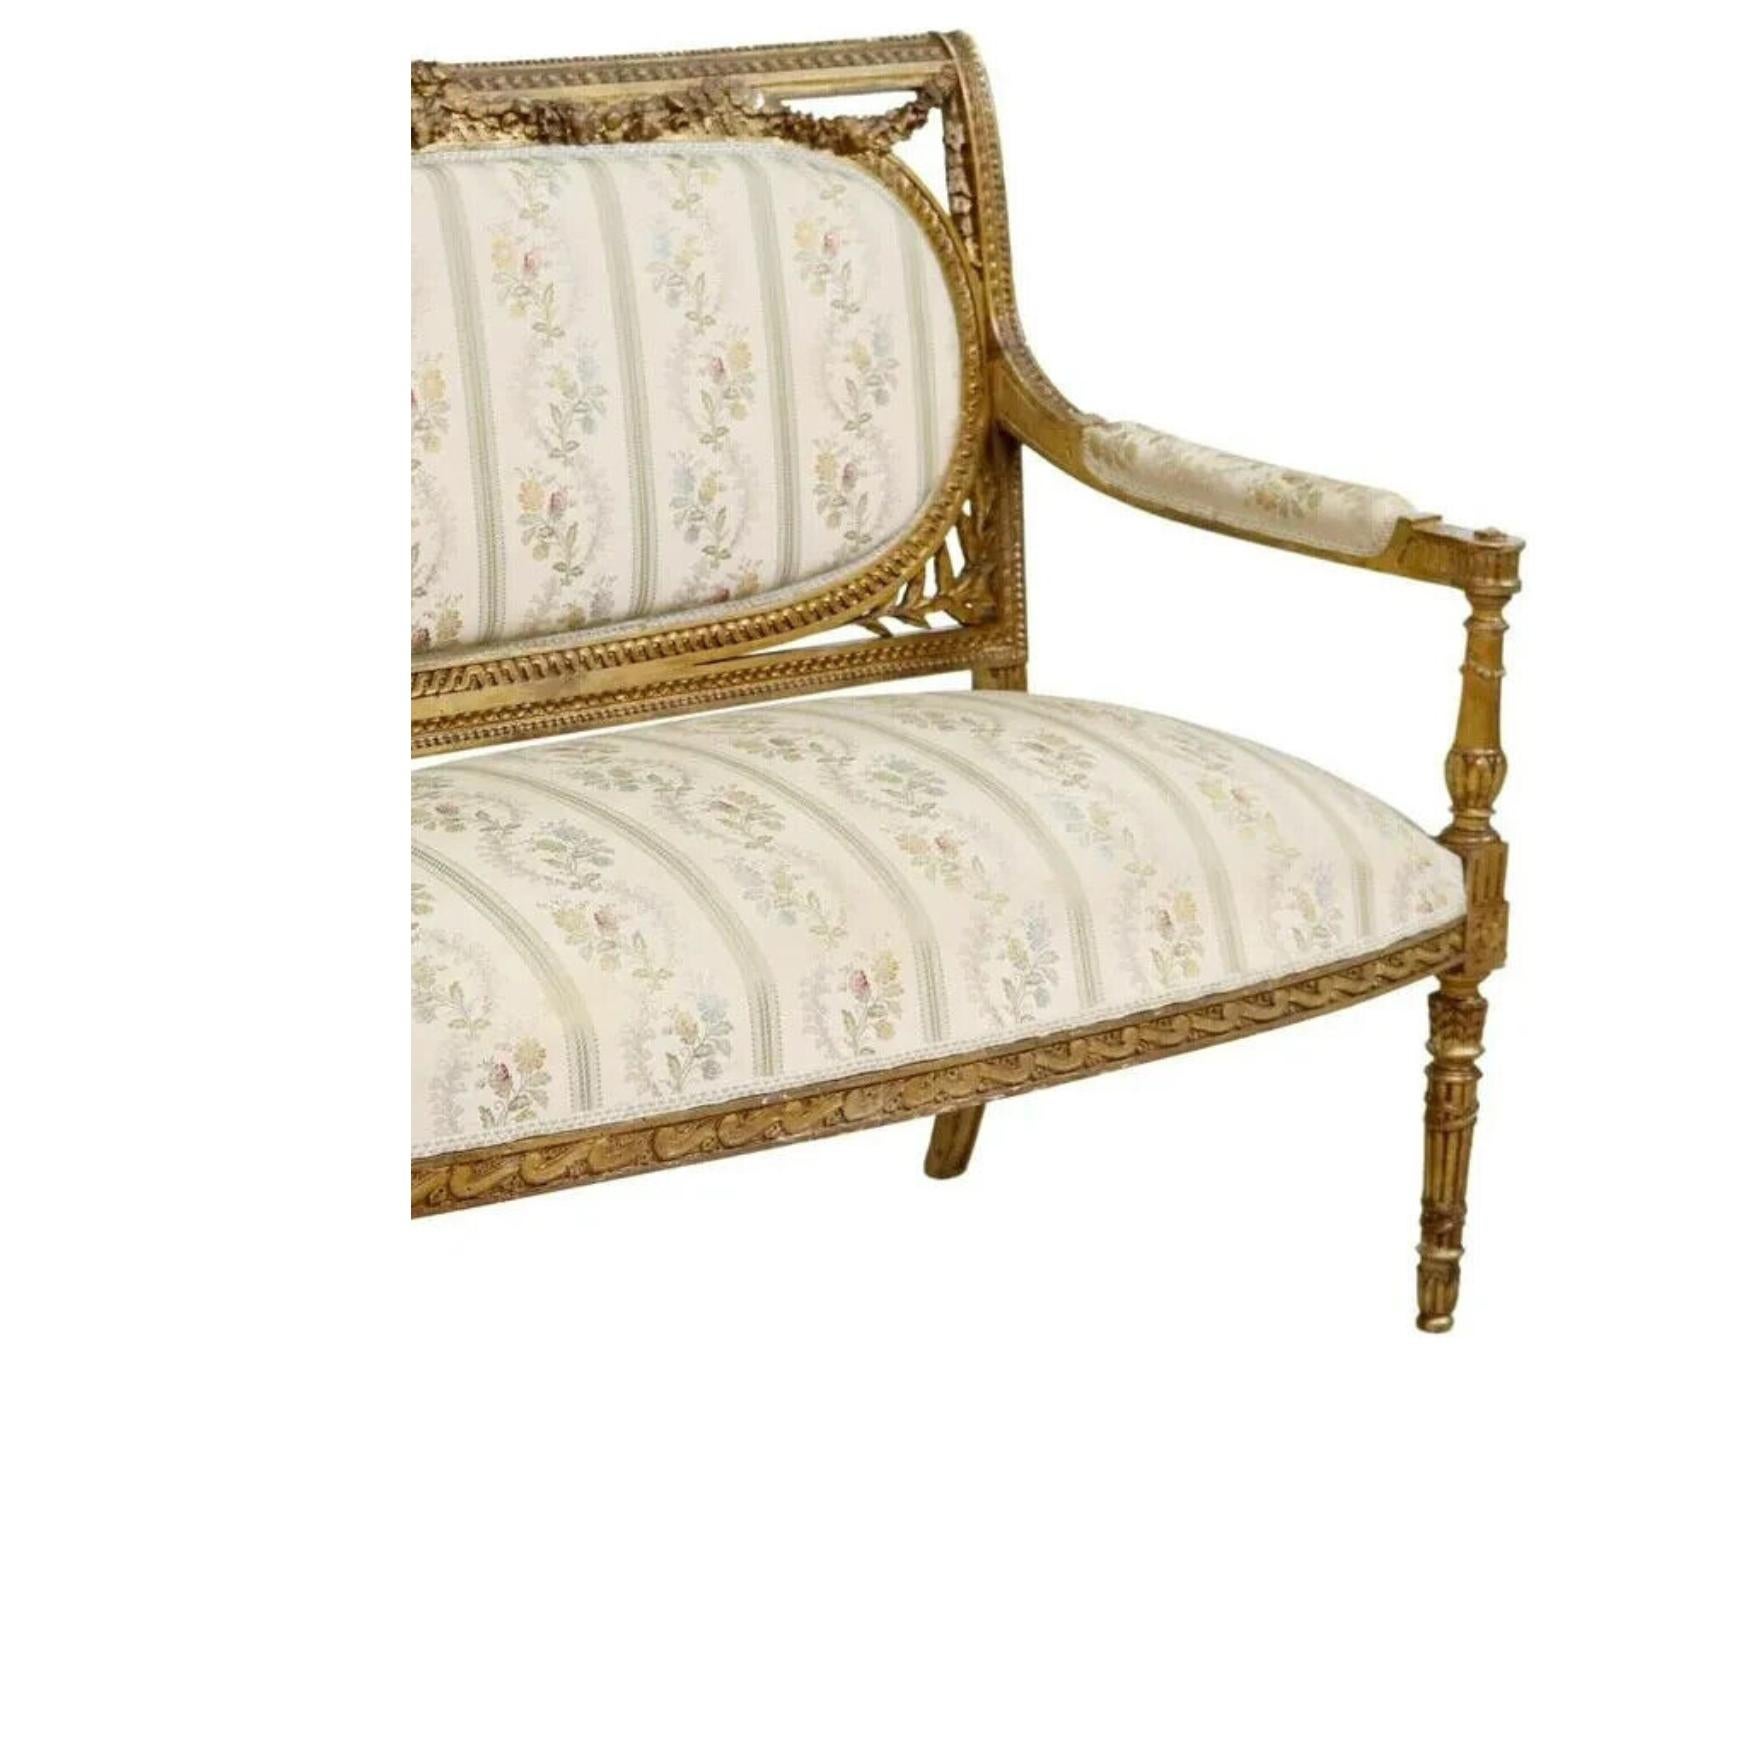 19th Century 1800s Antique Louis XVI Style, Floral Upholstered, Gilt, Crest, Molded Sofa!!